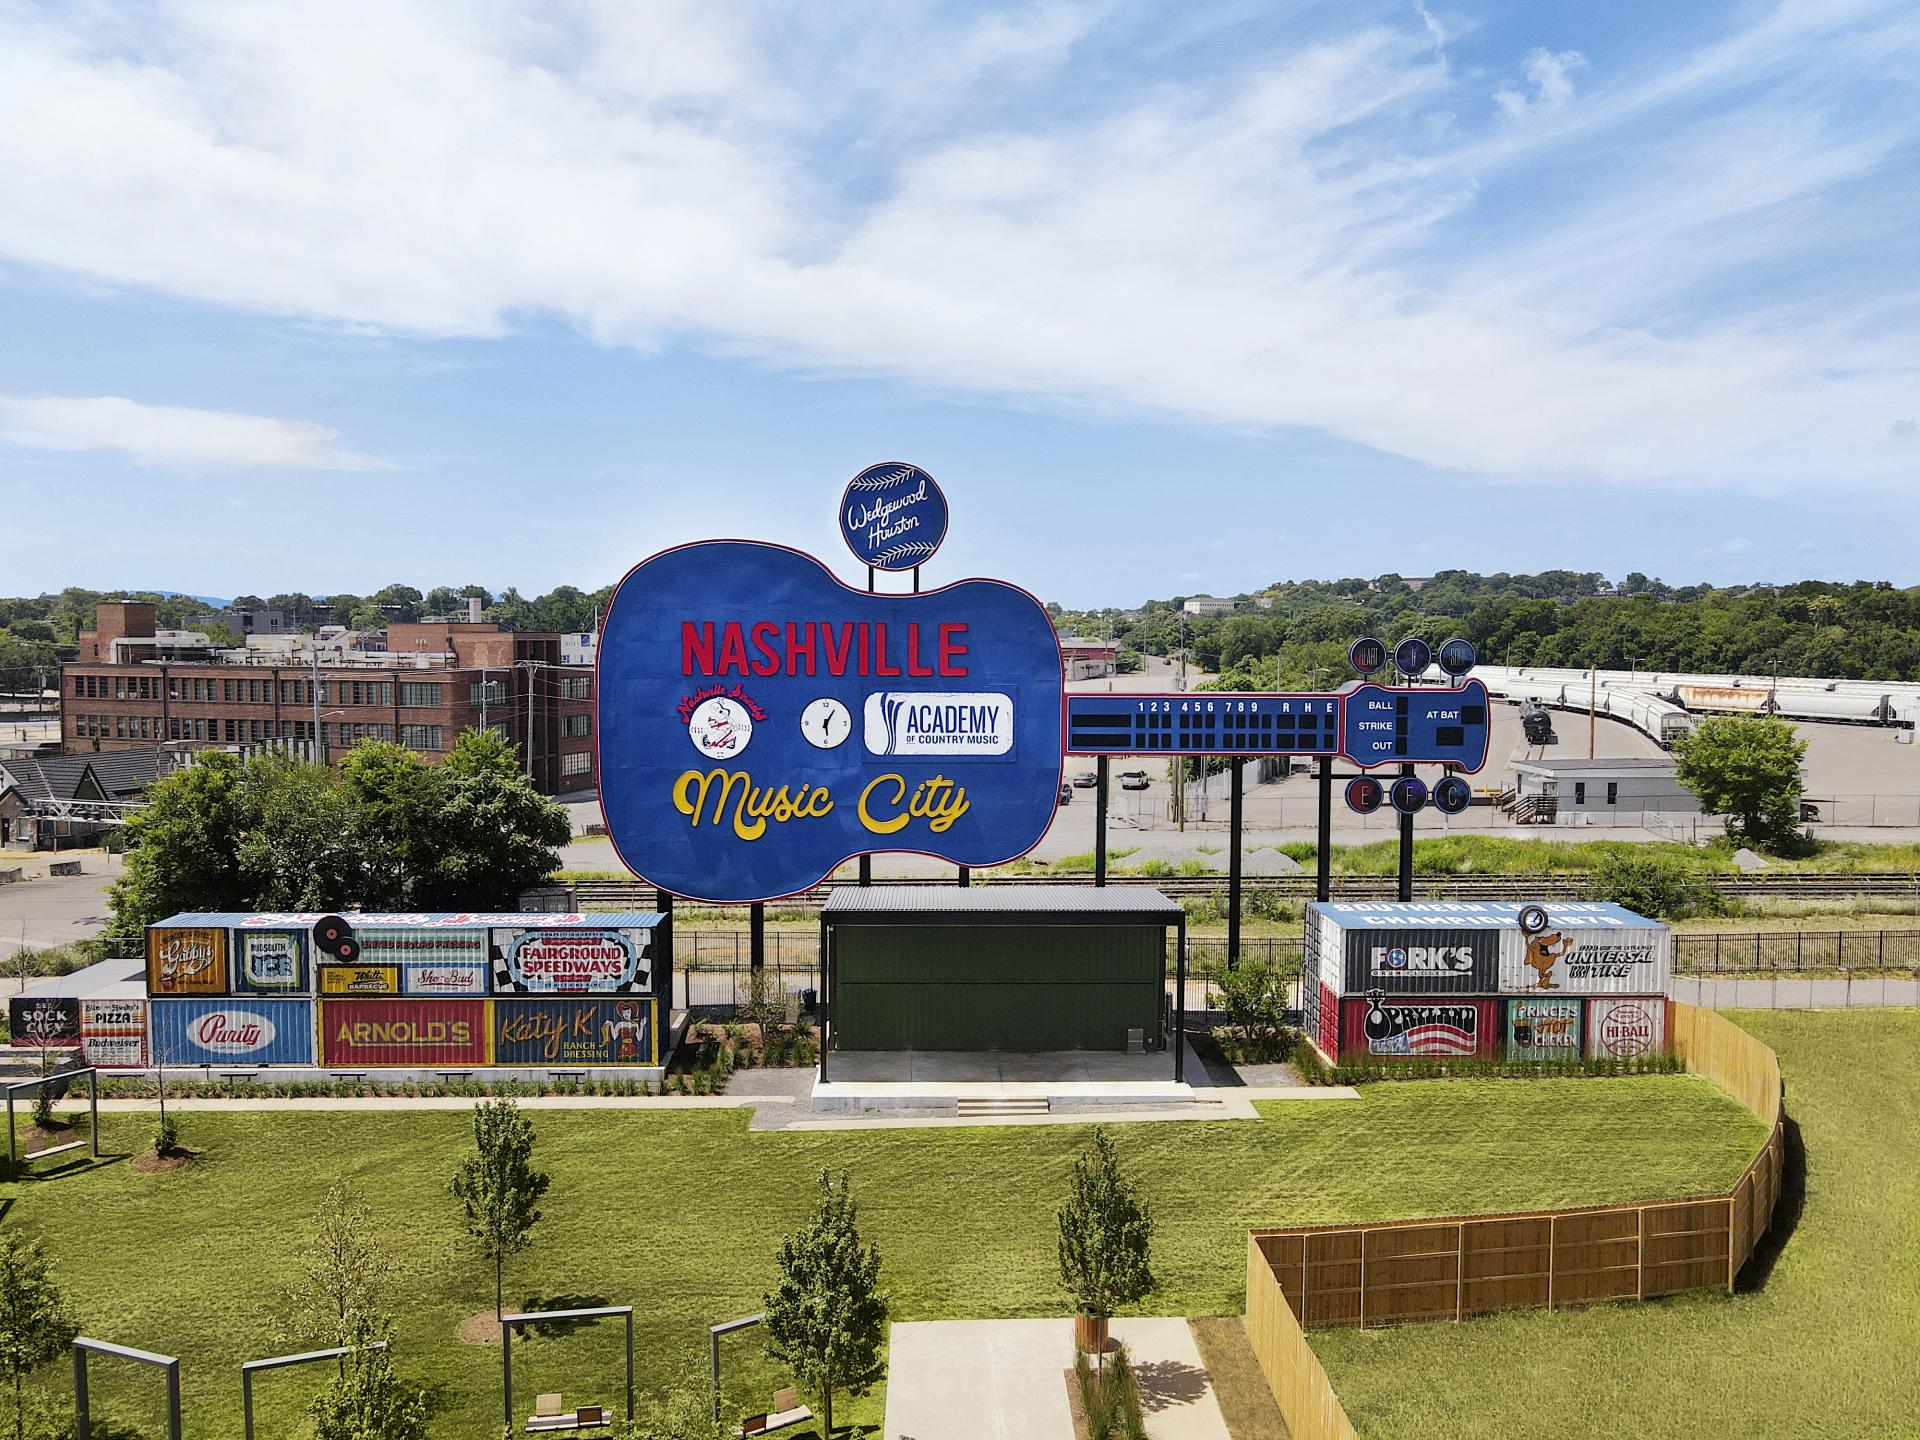 In partnership with Studio Delger, Jarvis Signs, and I Saw the Sign, the Greer Guitar was reimagined. The scoreboard sits above 14 shipping containers painted to resemble the original advertisements at Greer Stadium